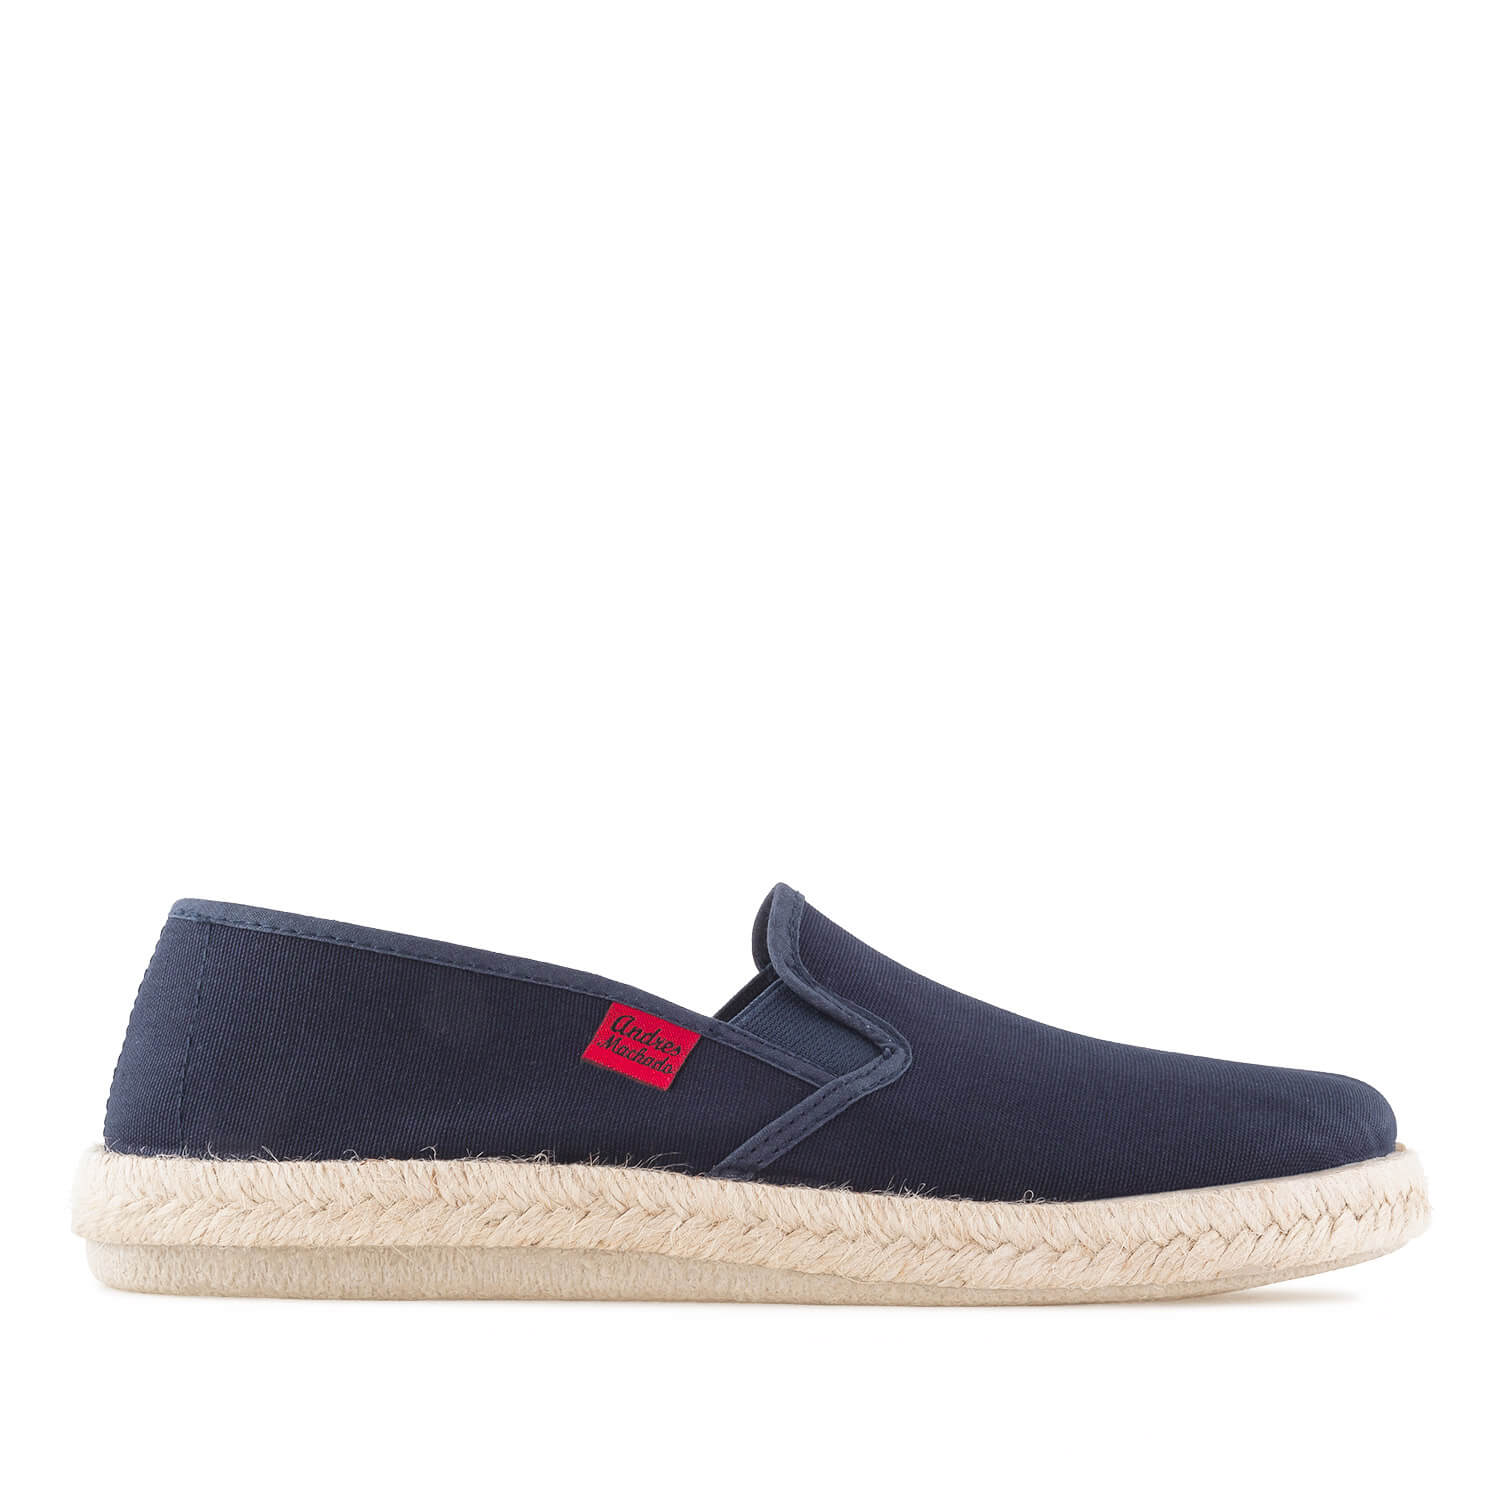 Mythical Navy Blue Canvas Slip-On Shoes with Jute and Rubber Sole ...